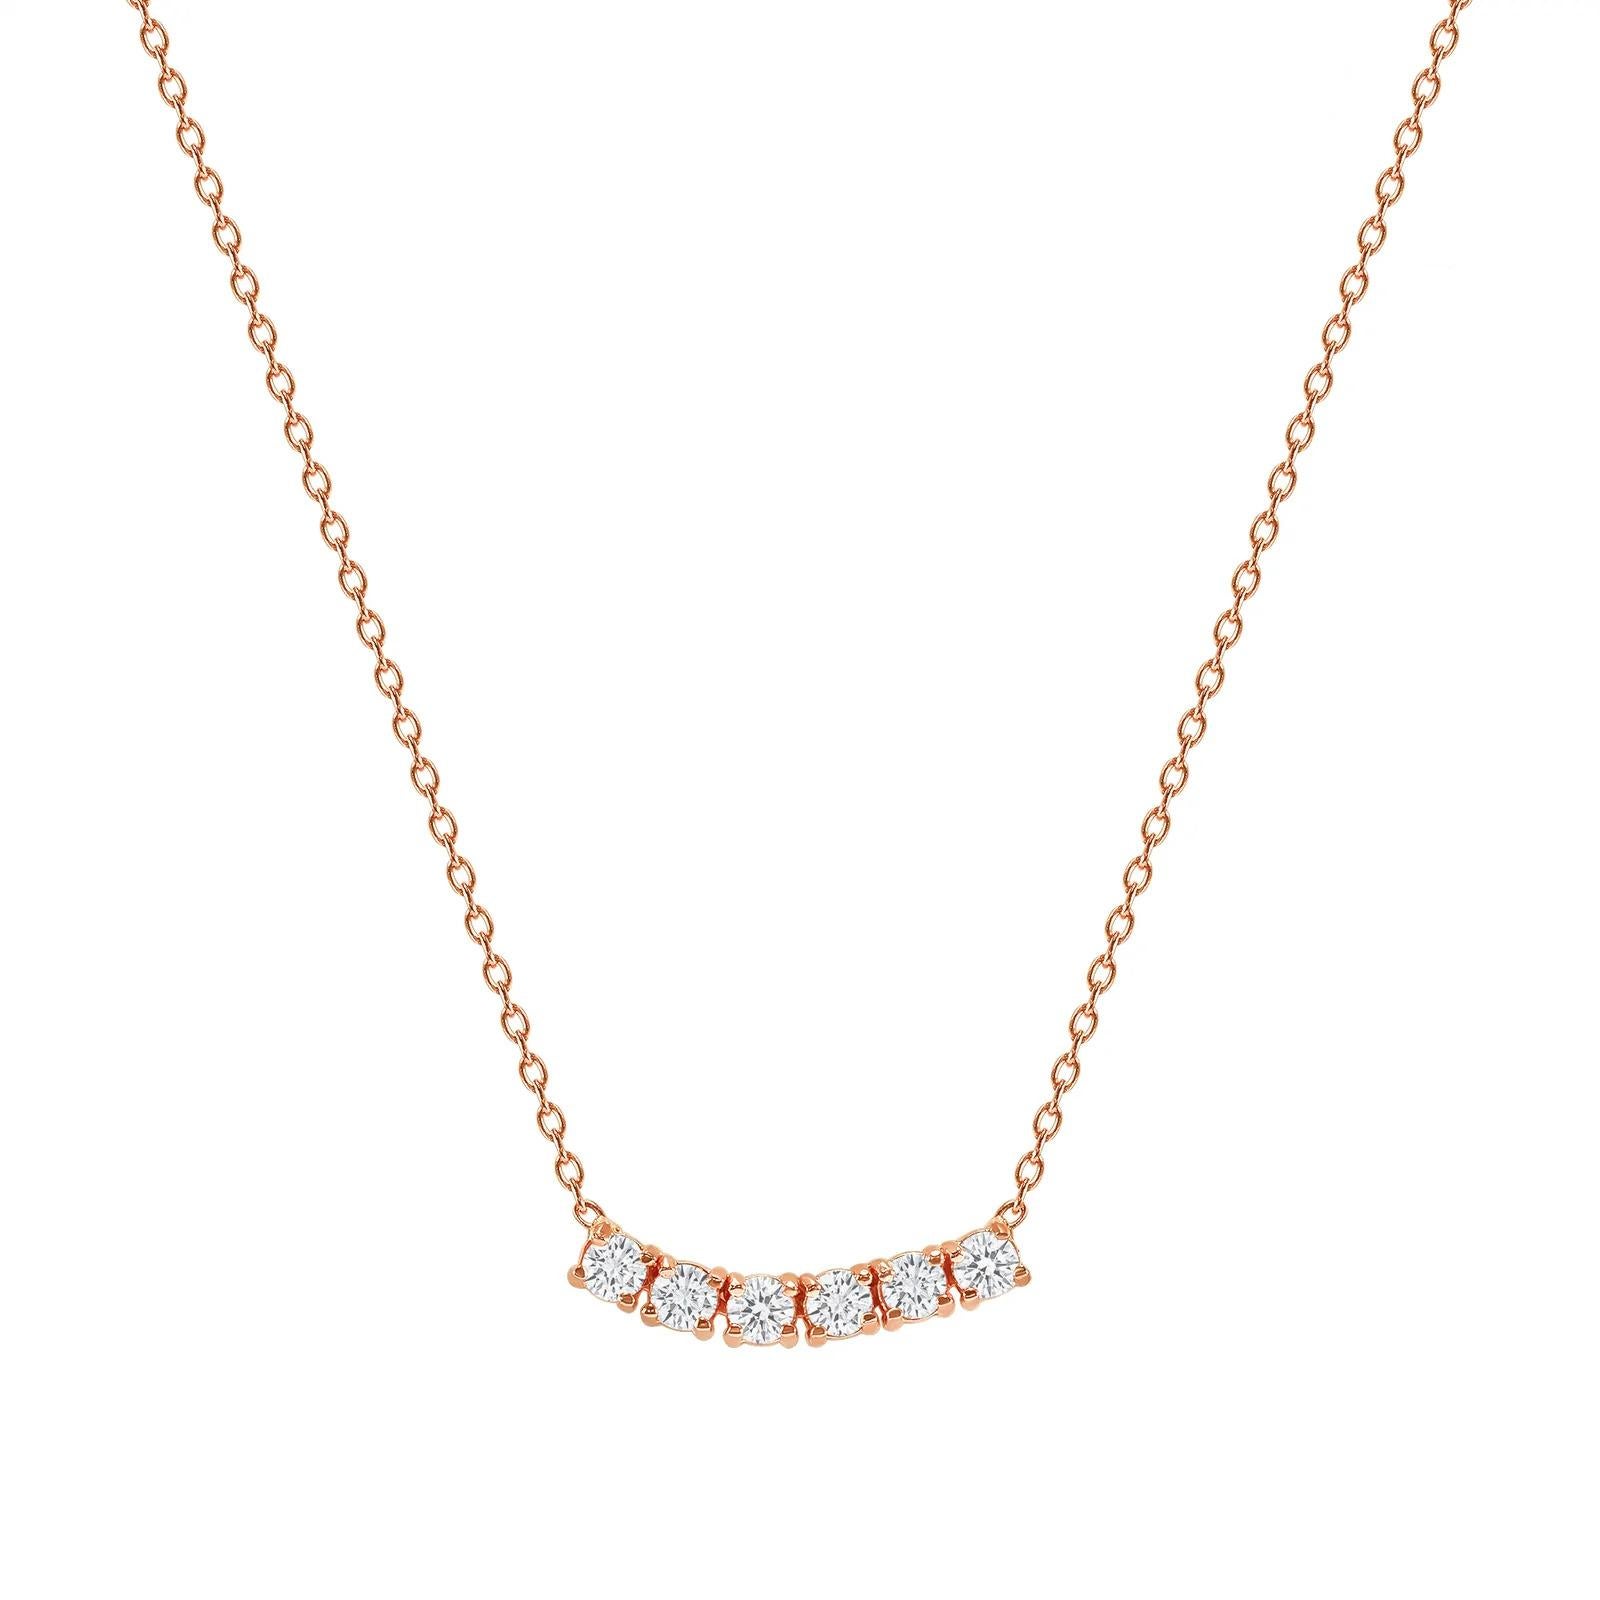 This petite, curved diamond necklace is crafted with gorgeous 14k gold set with six round diamonds.  

Gold: 14k 
Diamond Total Carats: 0.25 ct
Diamond Cut: Round (6 diamonds)
Diamond Clarity: VS
Diamond Color: F
Color: Rose Gold
Necklace Length: 24